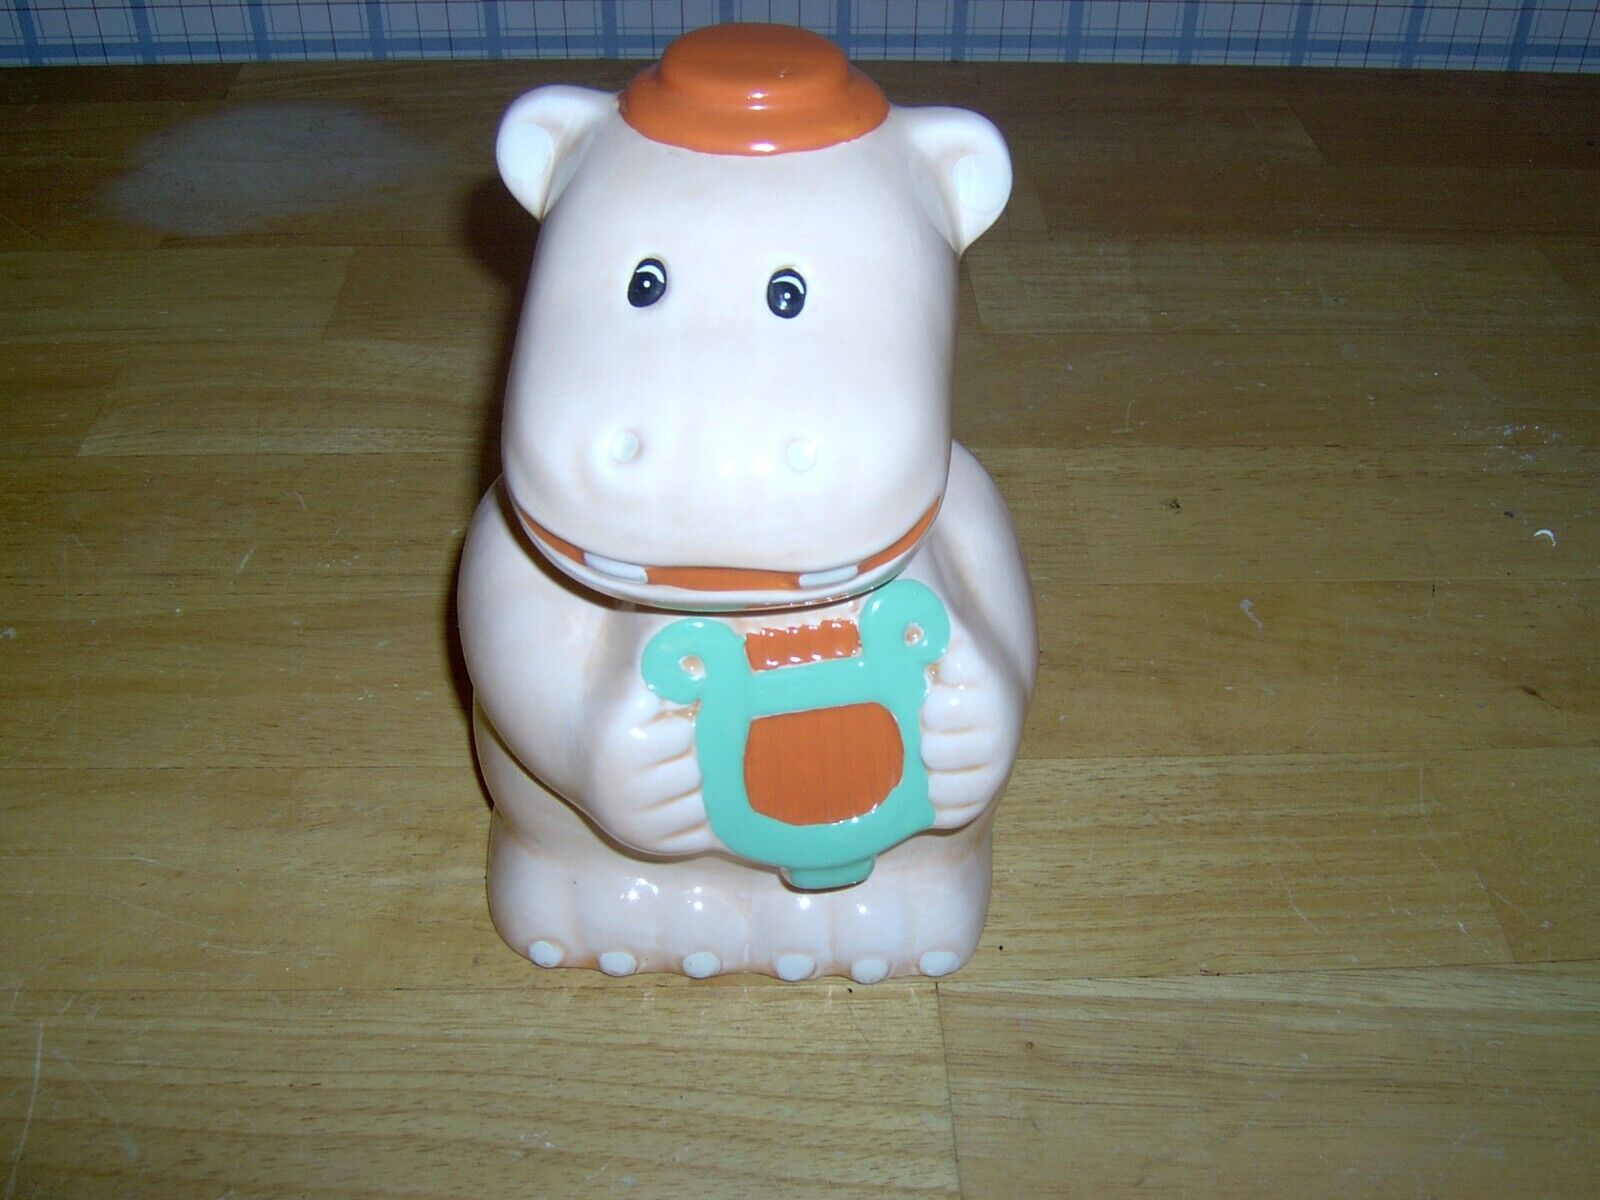 ORANGE HARP PLAYING CERAMIC HIPPO BANK WITH STOPPER.